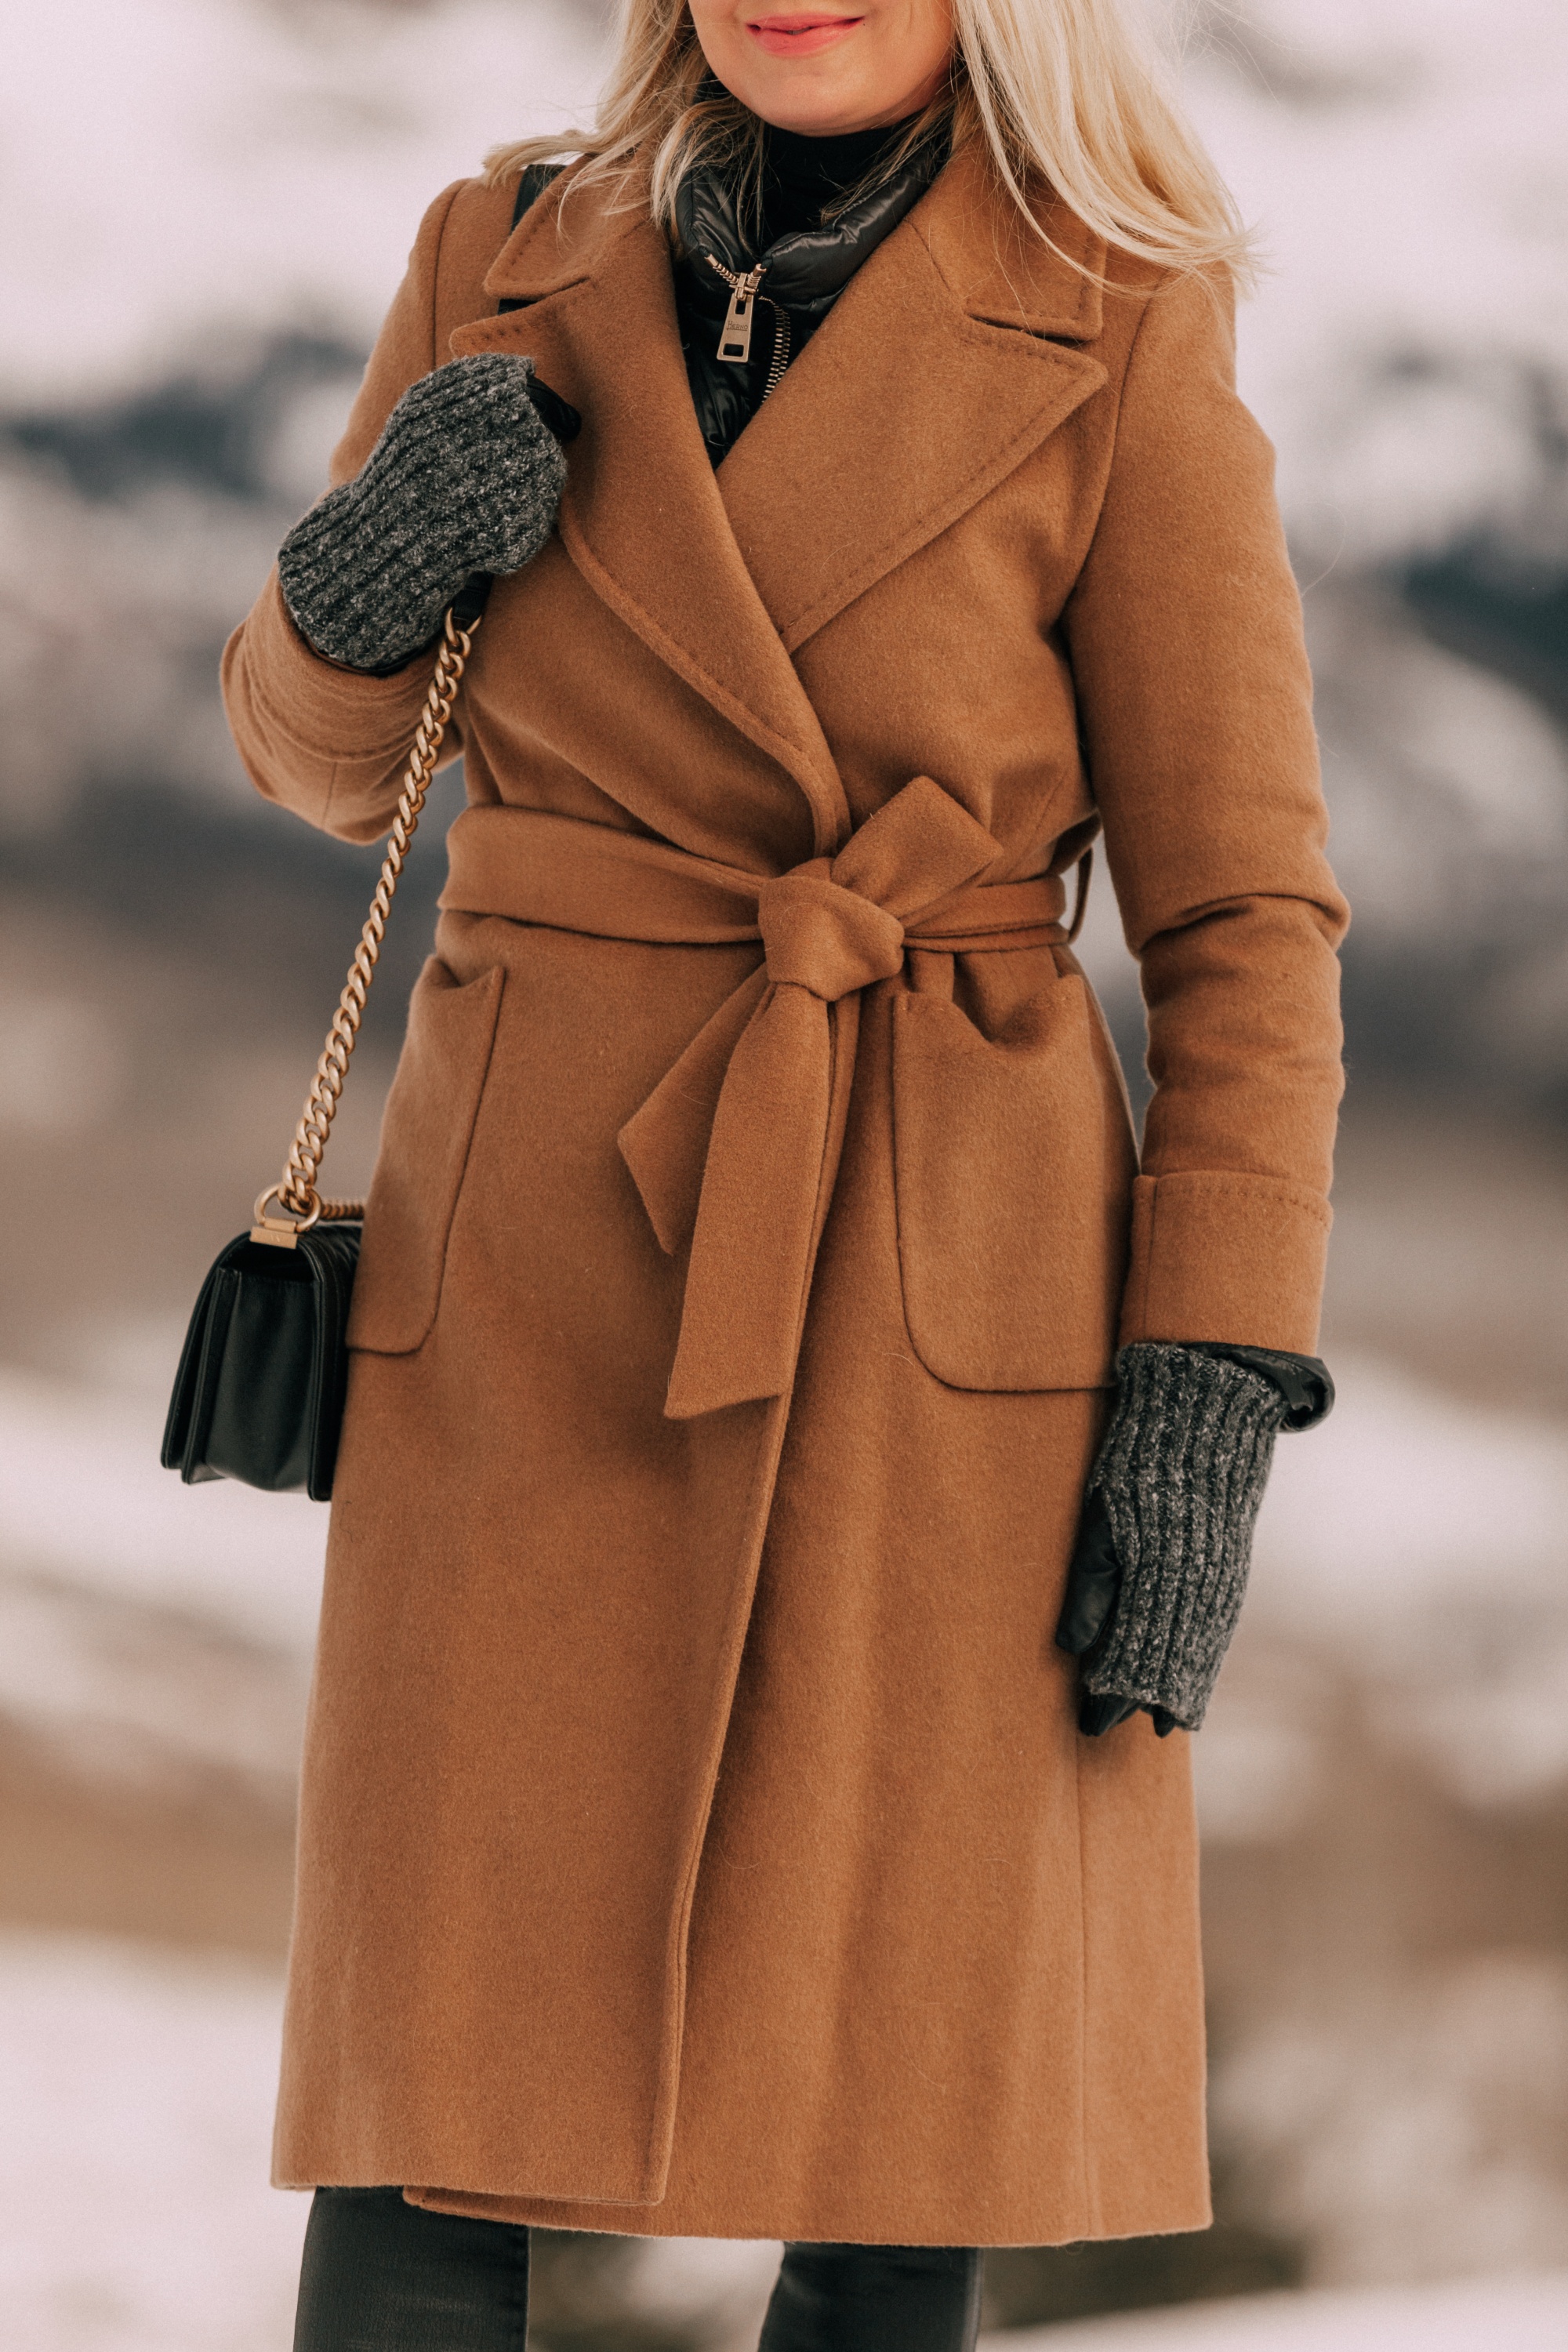 How To Layer Your Clothes, Fashion blogger Erin Busbee of BusbeeStyle.com wearing a black turtleneck sweater with Citizens of Humanity Rocket leatherette skinny jeans, Ugg wedge boots, camel wool coat by Mackage, Herno puffer coat, Carolina Amato gloves, Chanel boy bag in Telluride, CO